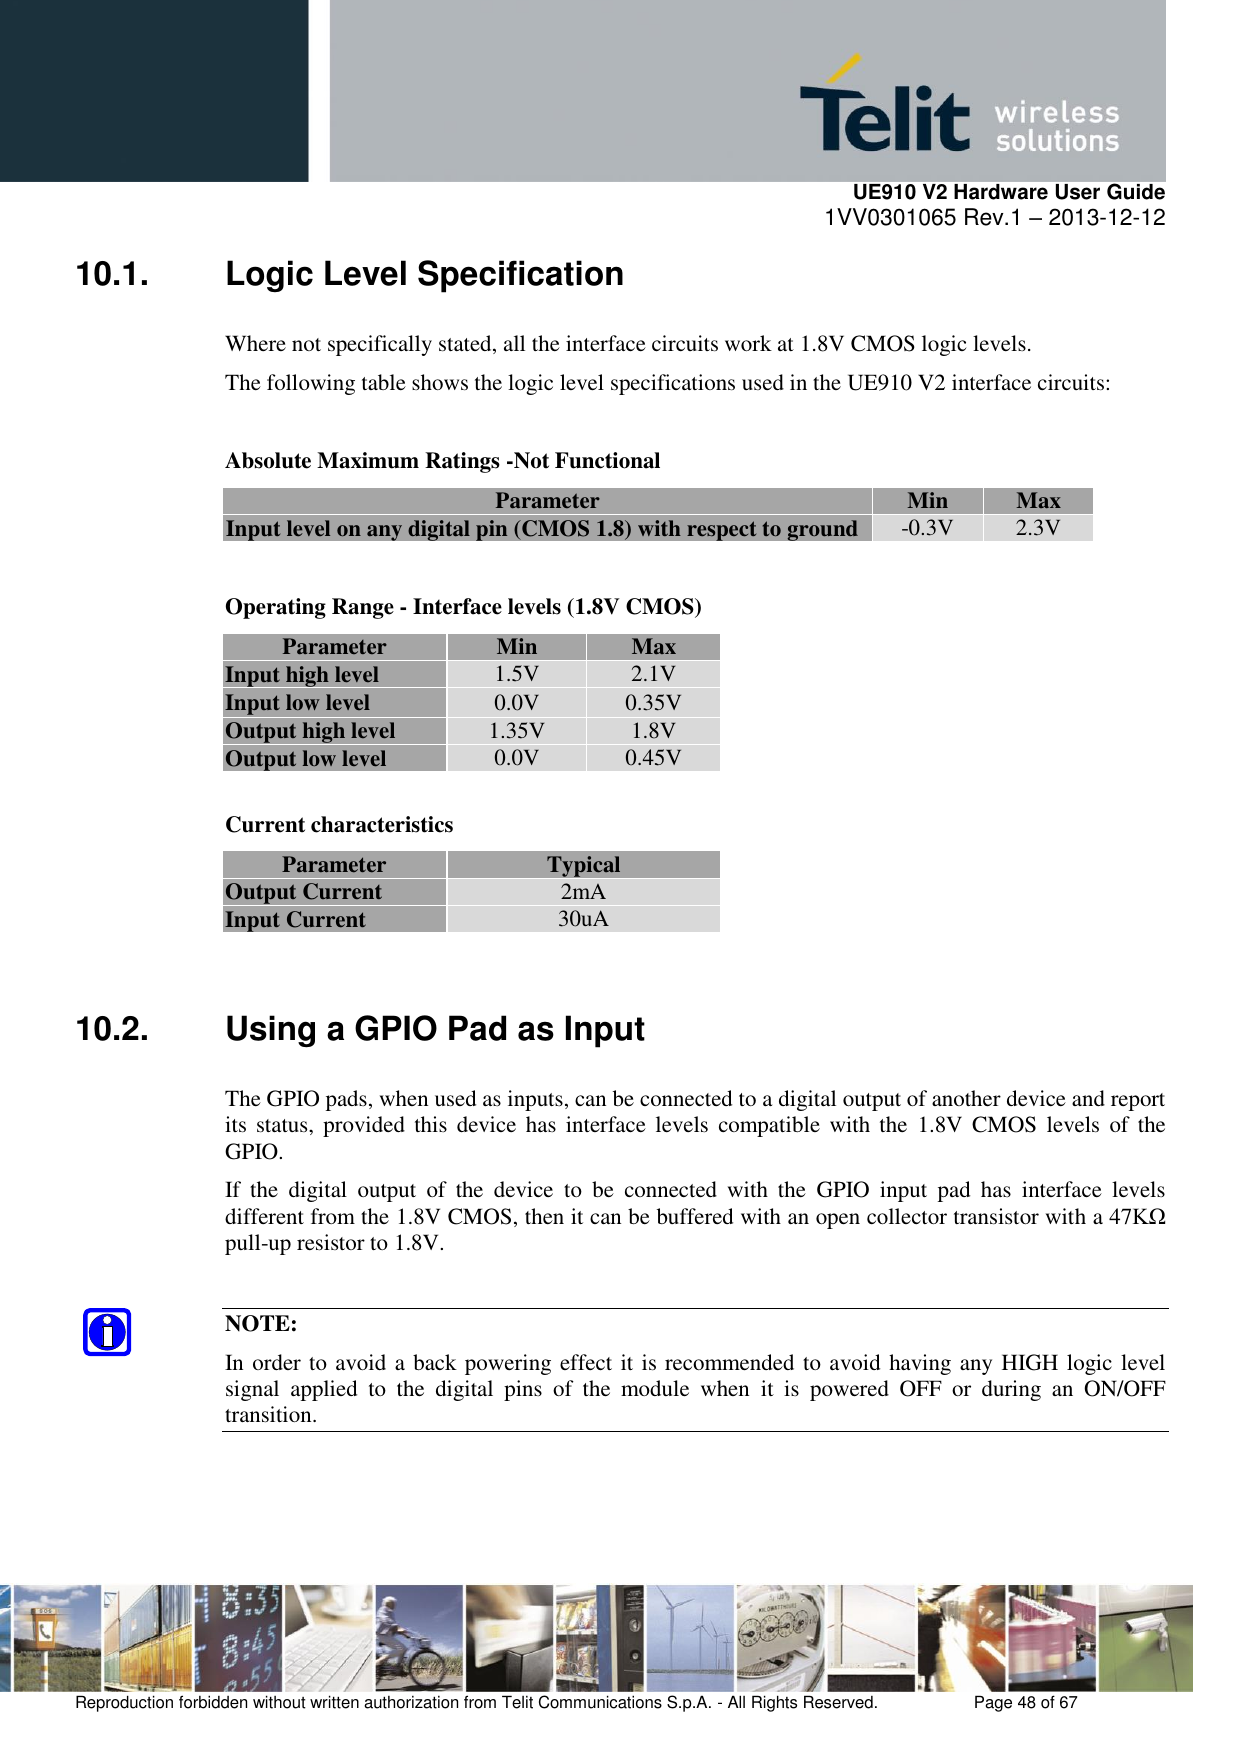     UE910 V2 Hardware User Guide 1VV0301065 Rev.1 – 2013-12-12  Reproduction forbidden without written authorization from Telit Communications S.p.A. - All Rights Reserved.    Page 48 of 67                                                     10.1.  Logic Level Specification Where not specifically stated, all the interface circuits work at 1.8V CMOS logic levels. The following table shows the logic level specifications used in the UE910 V2 interface circuits:  Absolute Maximum Ratings -Not Functional Parameter Min Max Input level on any digital pin (CMOS 1.8) with respect to ground -0.3V 2.3V  Operating Range - Interface levels (1.8V CMOS) Parameter Min Max Input high level 1.5V 2.1V Input low level 0.0V 0.35V Output high level 1.35V 1.8V Output low level 0.0V 0.45V  Current characteristics  Parameter  Typical Output Current 2mA Input Current 30uA  10.2.  Using a GPIO Pad as Input The GPIO pads, when used as inputs, can be connected to a digital output of another device and report its  status, provided  this  device  has  interface  levels  compatible  with the  1.8V  CMOS  levels  of  the GPIO.  If  the  digital  output  of  the  device  to  be  connected  with  the  GPIO  input  pad  has  interface  levels different from the 1.8V CMOS, then it can be buffered with an open collector transistor with a 47KΩ pull-up resistor to 1.8V.  NOTE: In order to avoid a back powering effect it is recommended to avoid having any HIGH logic level signal  applied  to  the  digital  pins  of  the  module  when  it  is  powered  OFF  or  during  an  ON/OFF transition.  